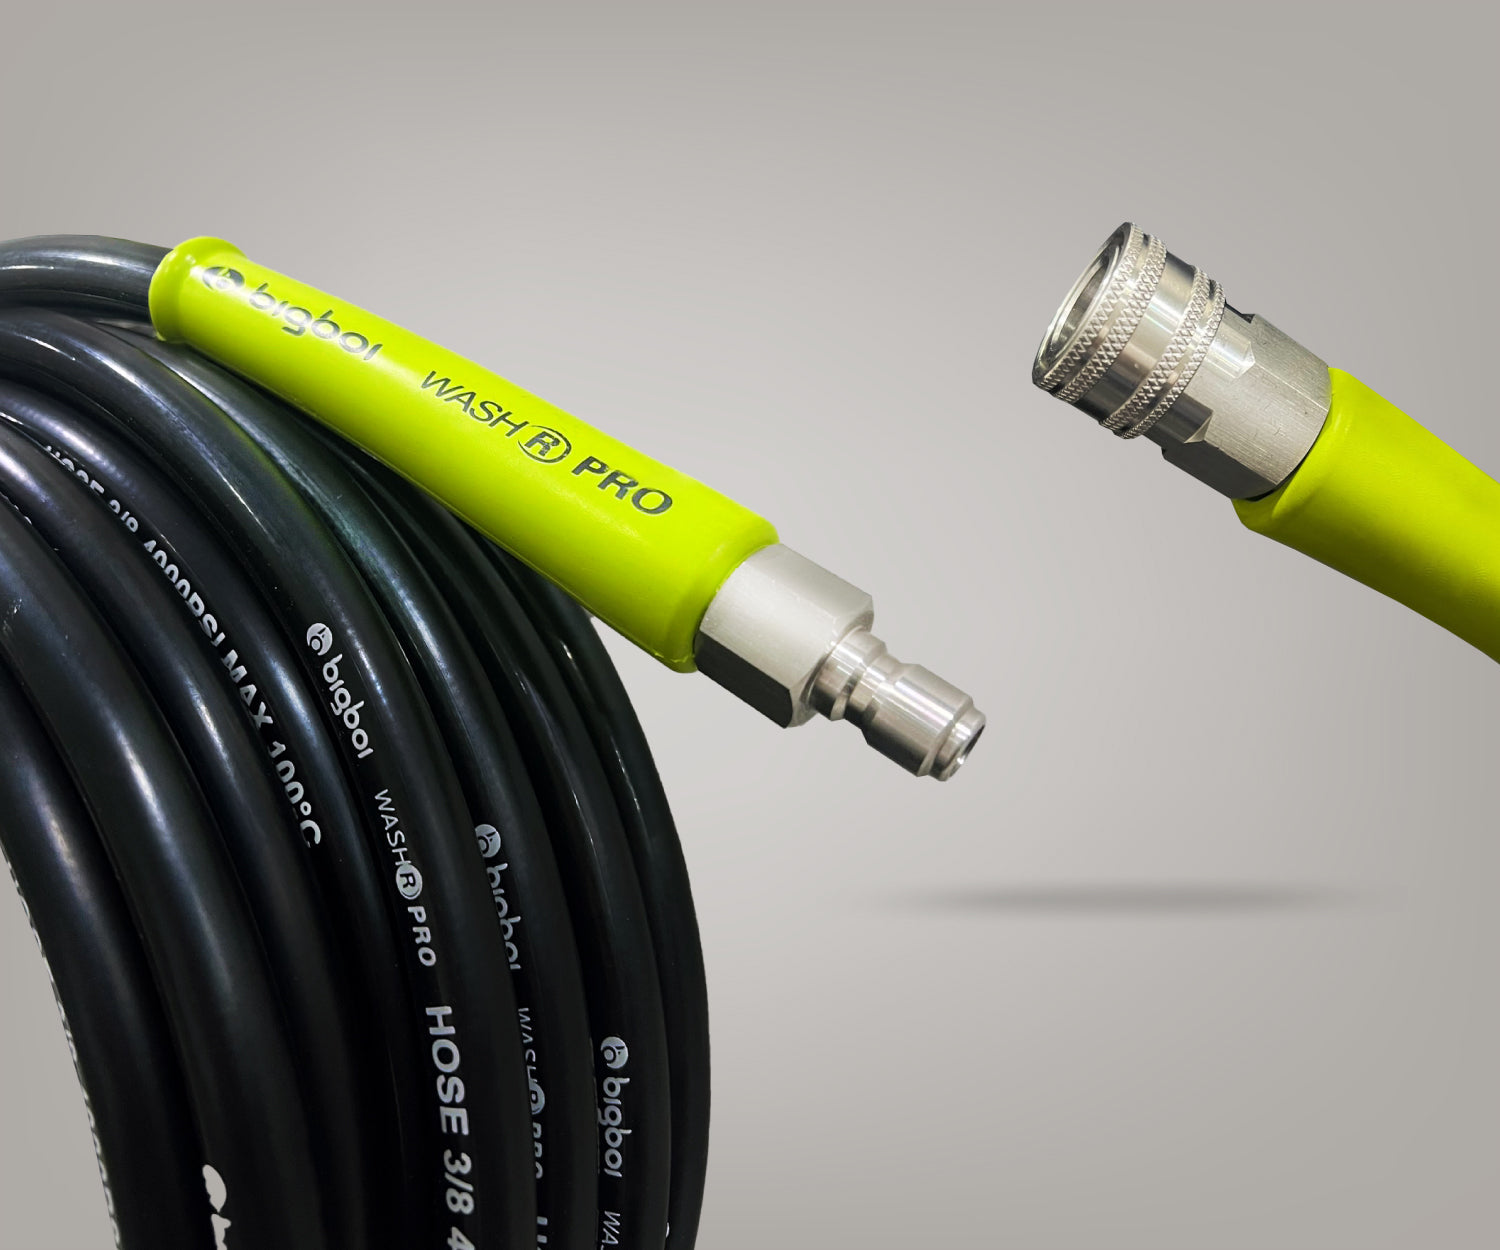 WASHRPRO & DUO 13M COMMERCIAL HOSE